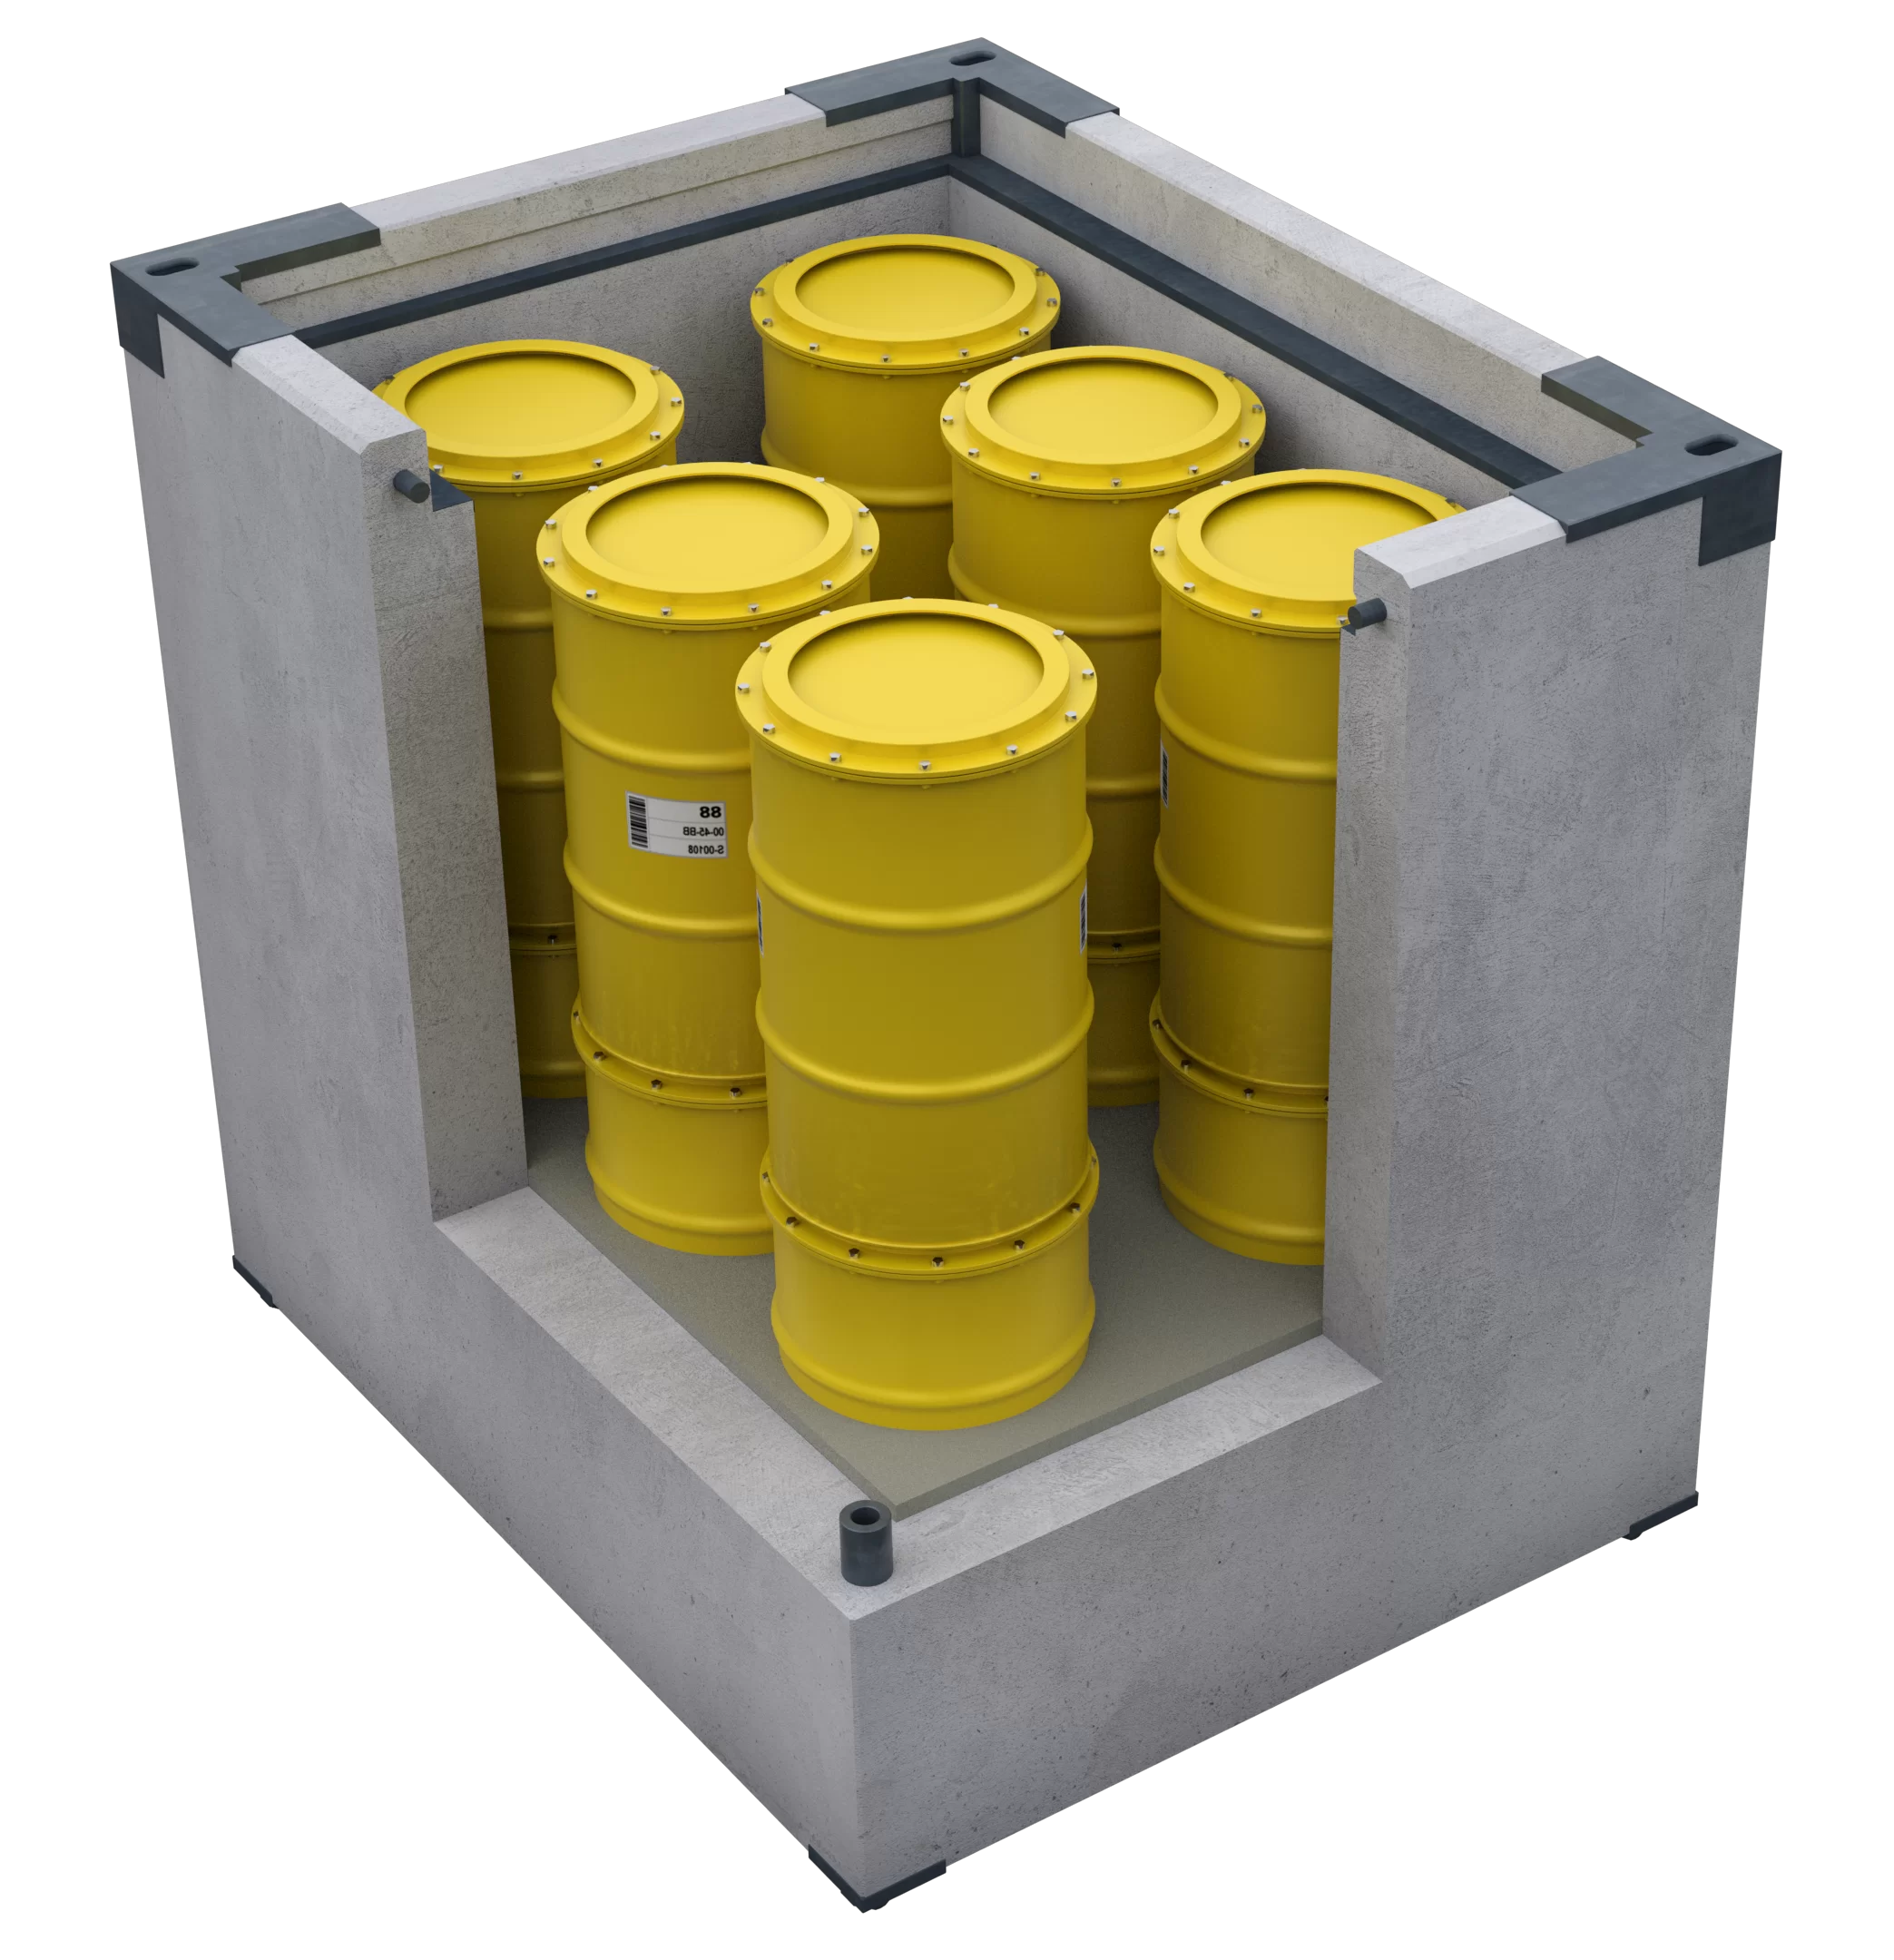 Disposal drums filled with low- and intermediate-level waste in a concrete container.